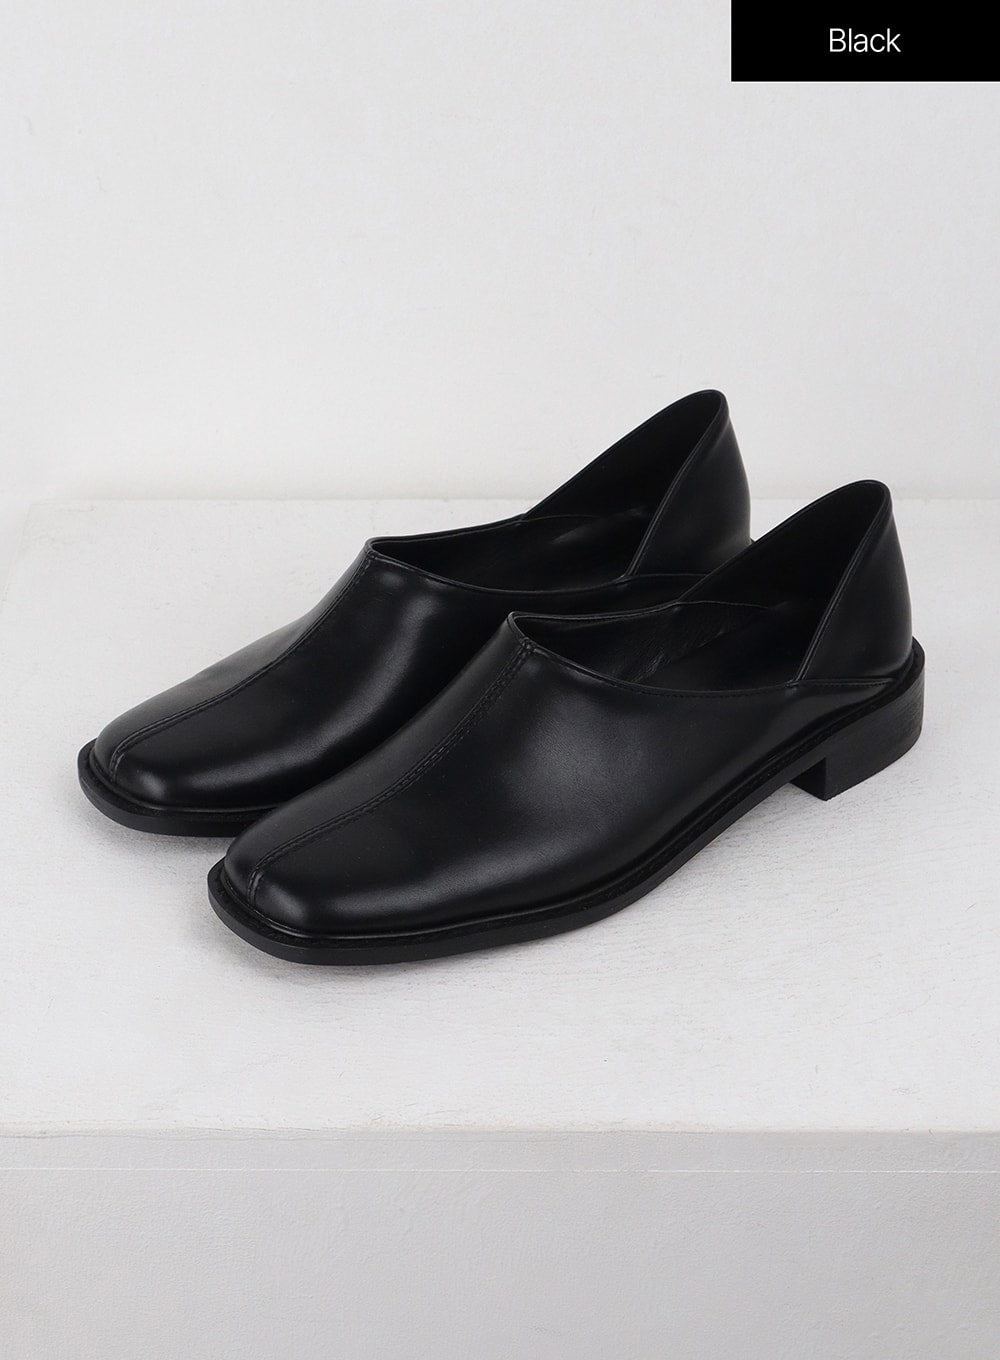 basic-solid-faux-leather-loafers-oj415 / Black